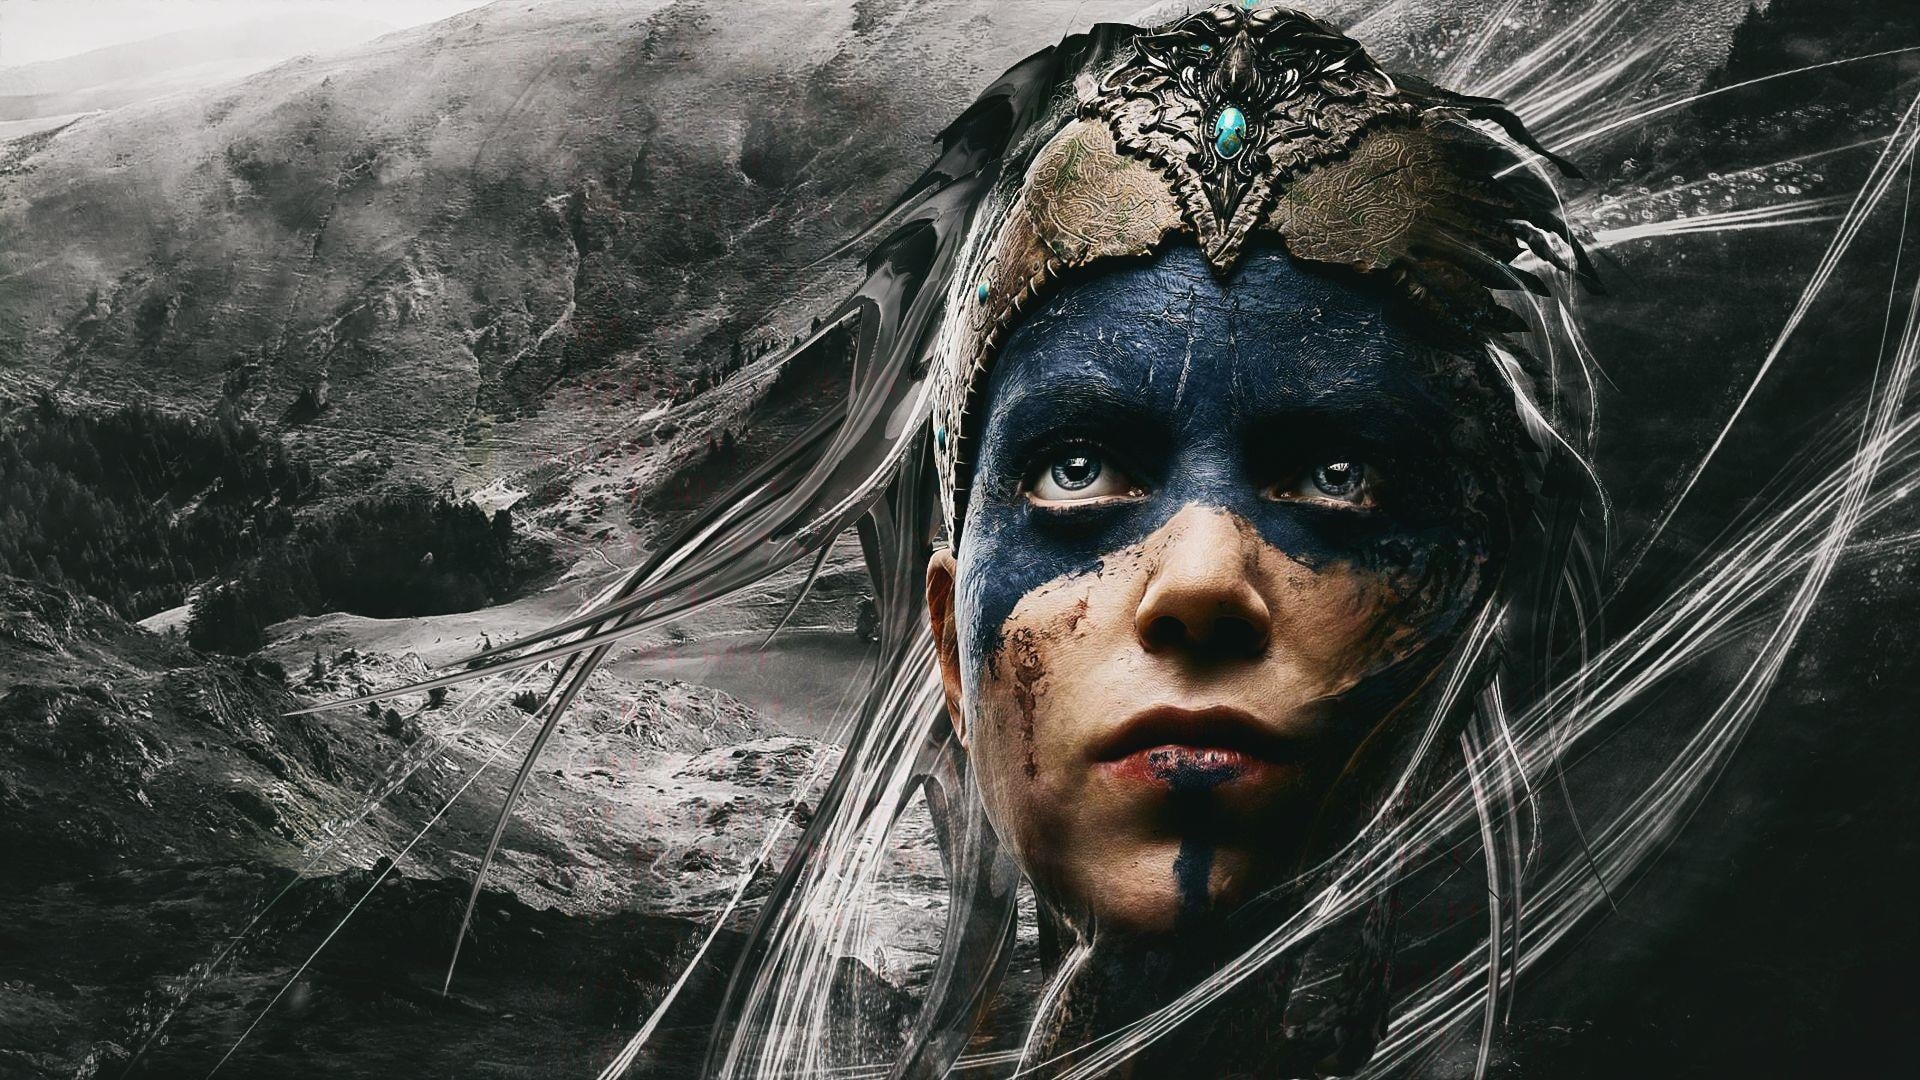 Guide for Hellblade Senua's Sacrifice, Walkthrough overview, Game tips and tricks, Strategy guide, 1920x1080 Full HD Desktop